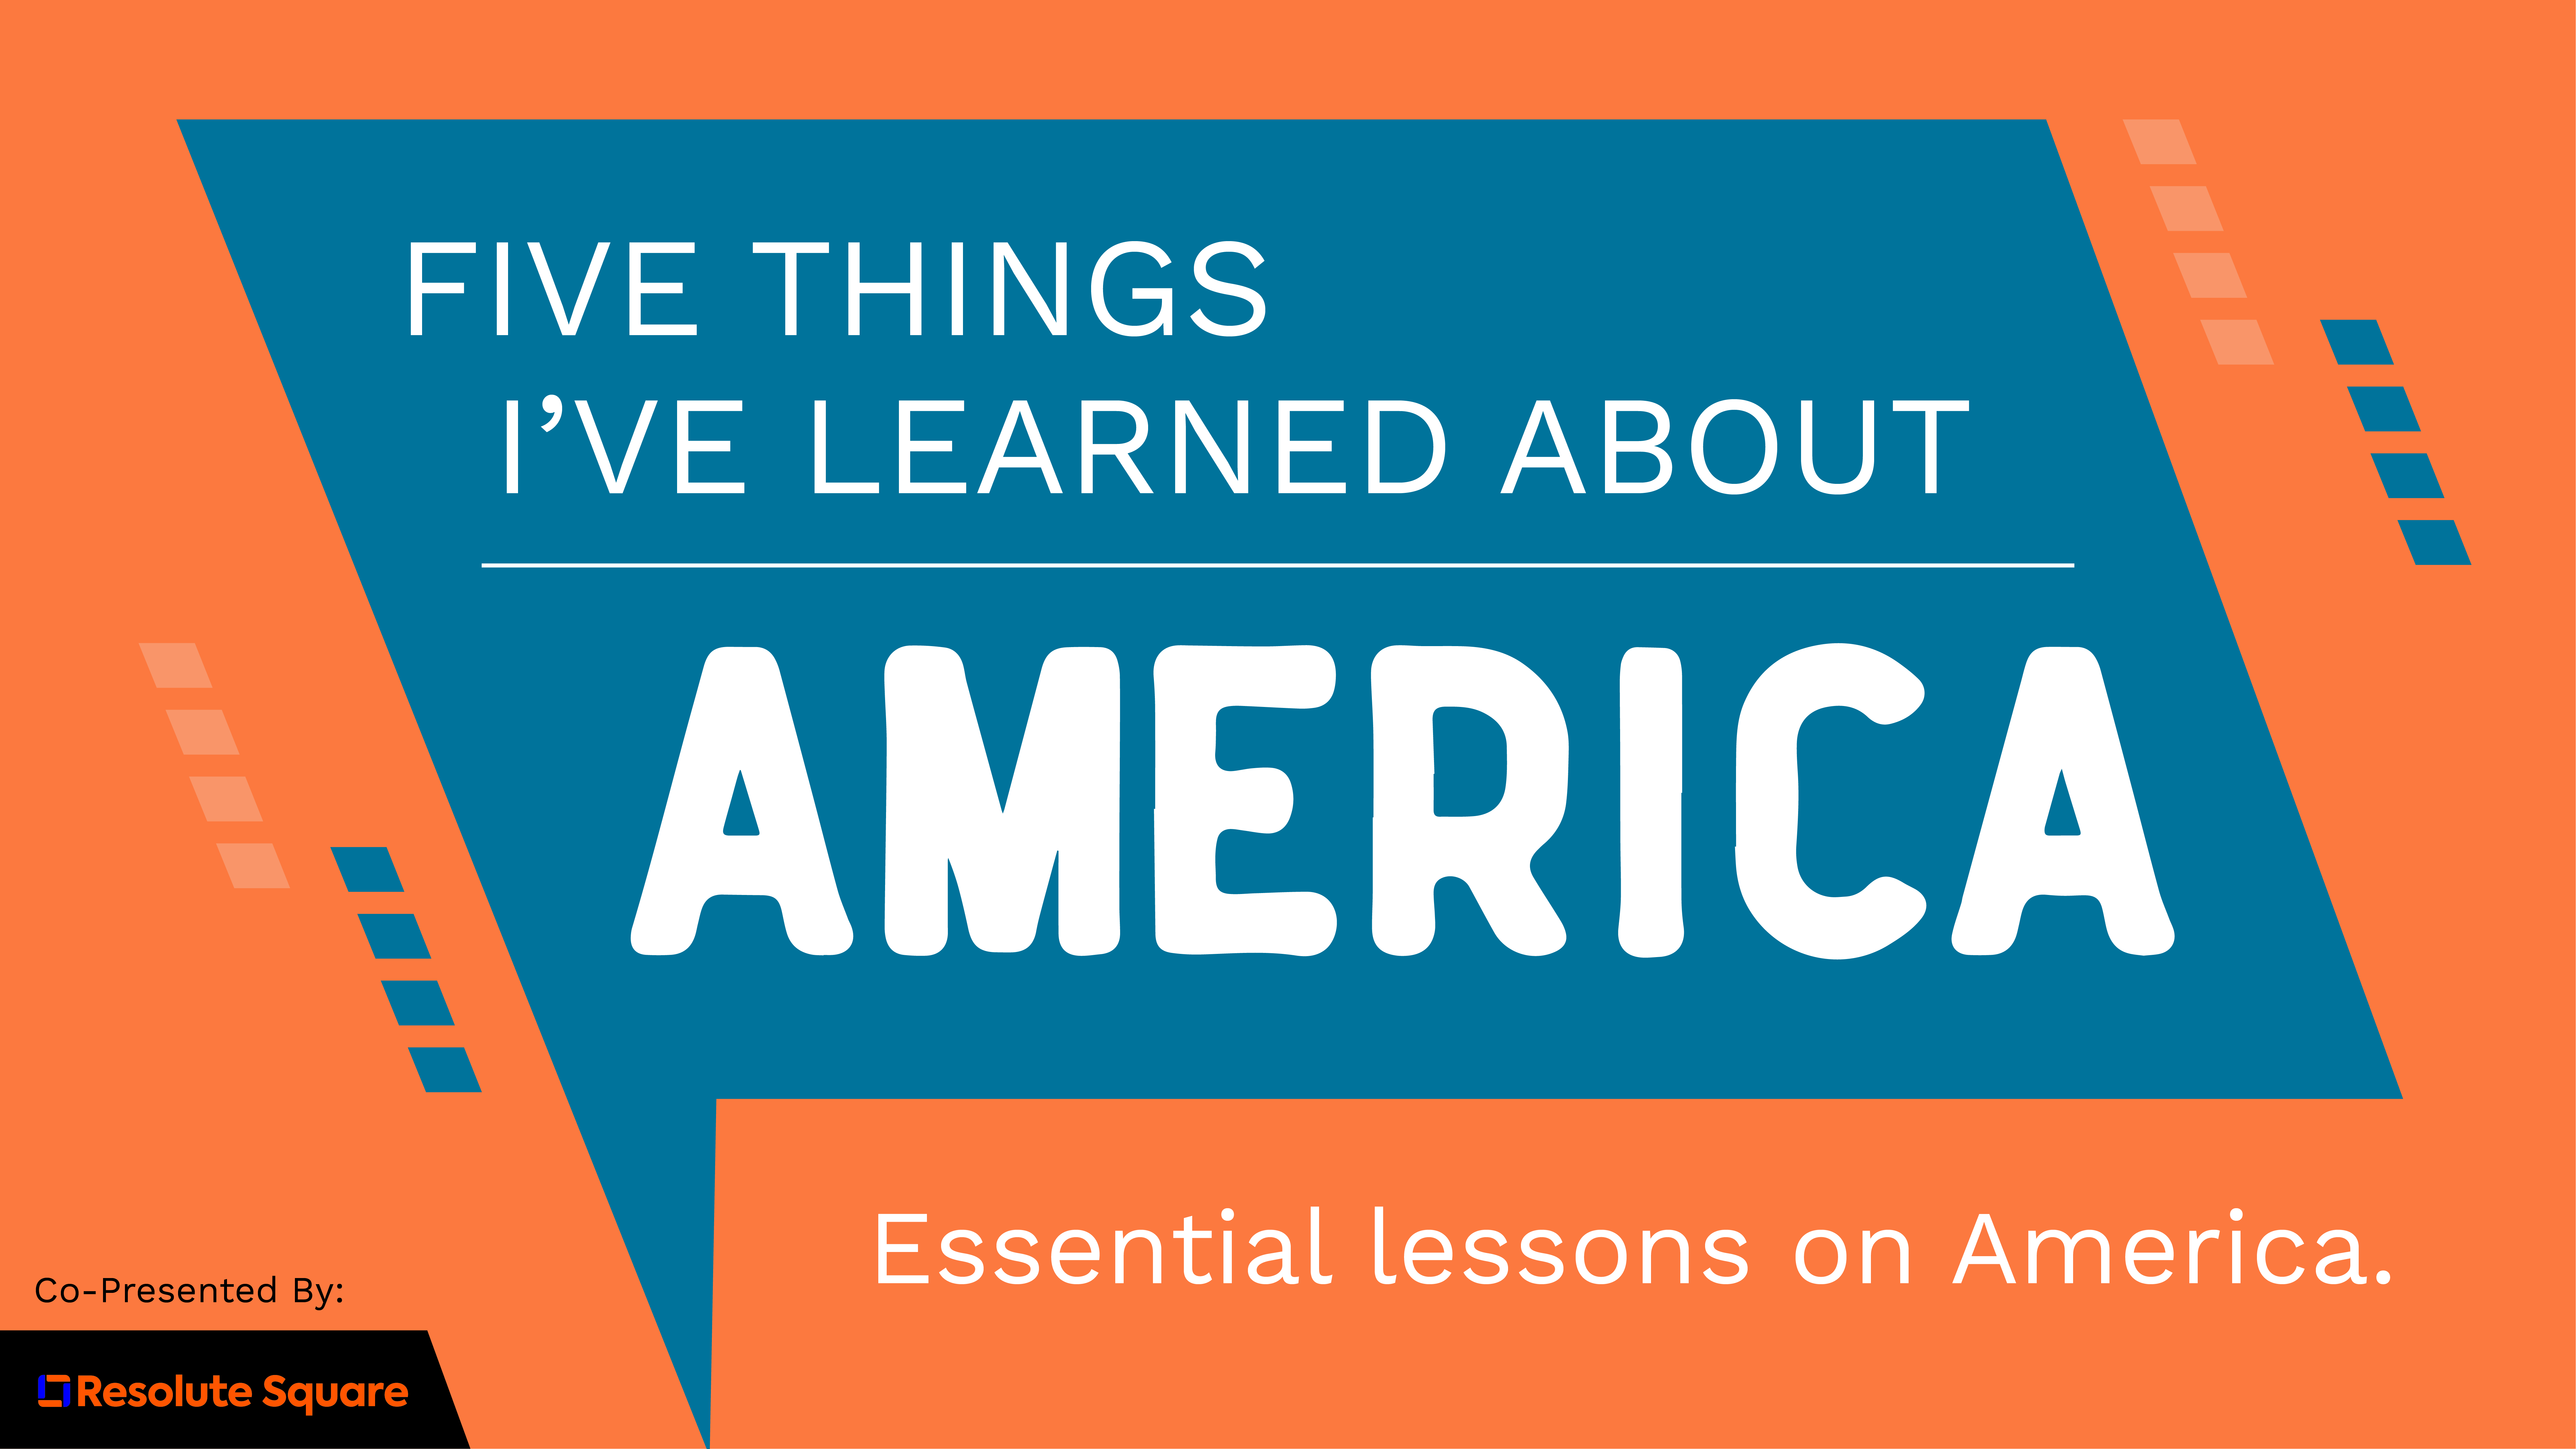 Five Things I've Learned About America